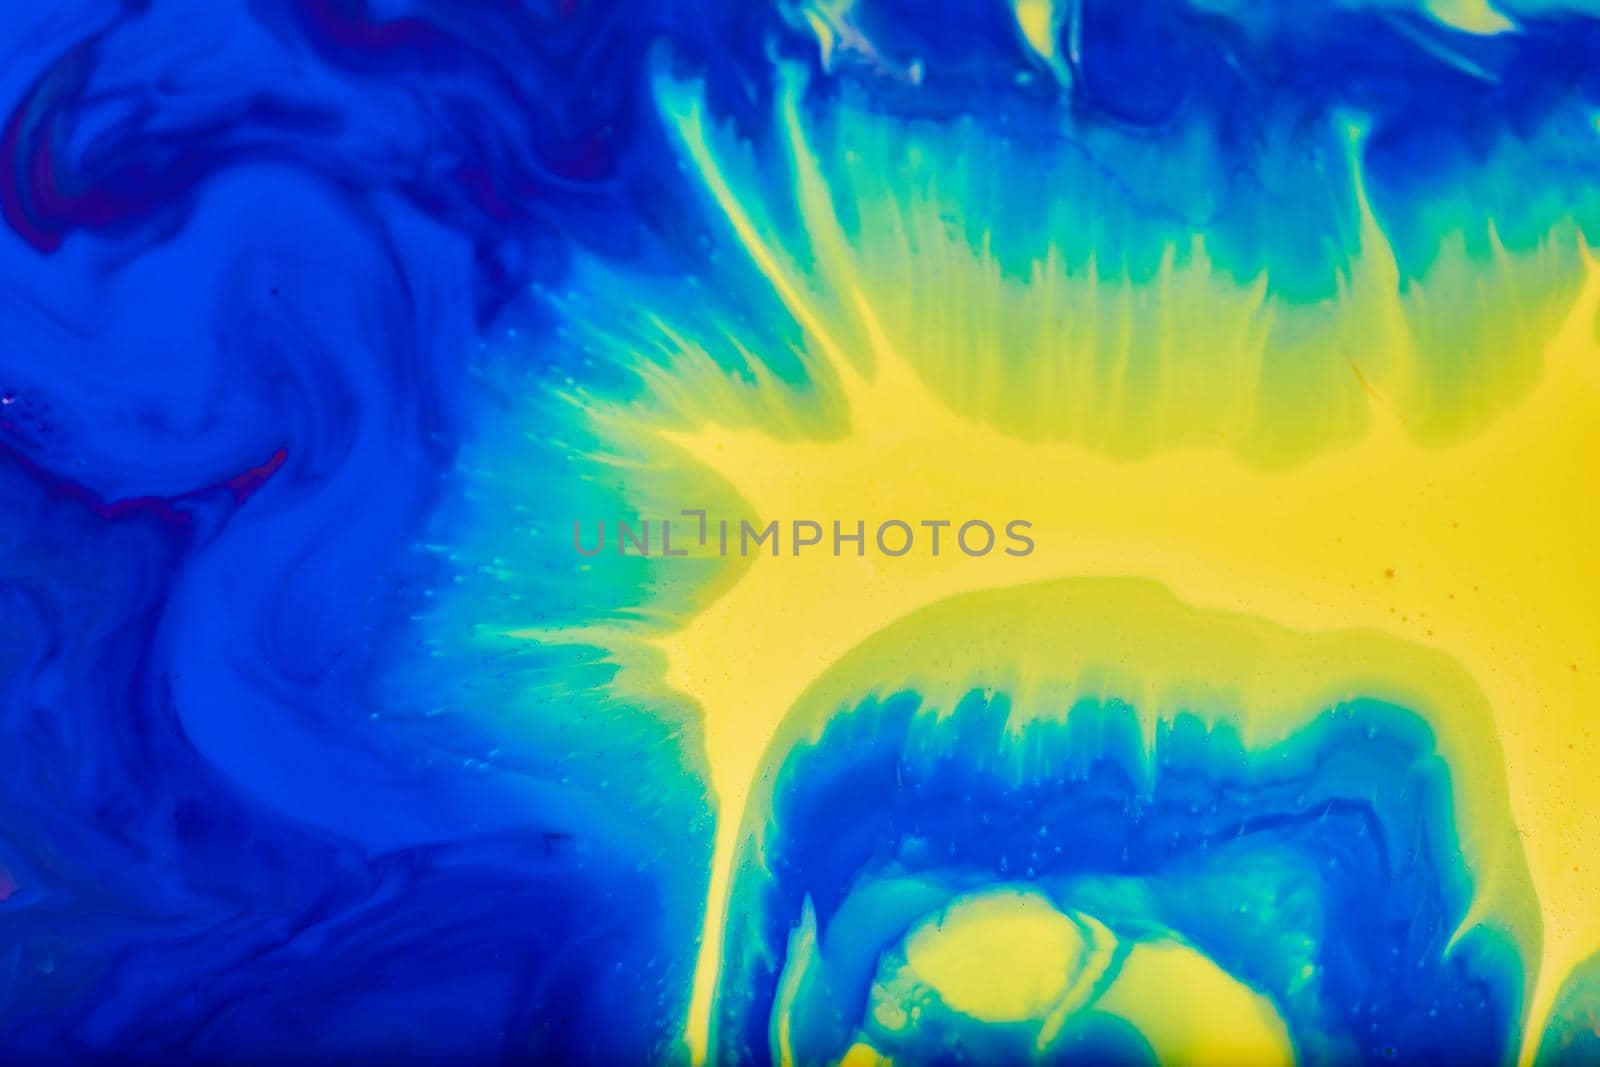 Bold and colorful swirls of blue and yellow merging into green by njproductions